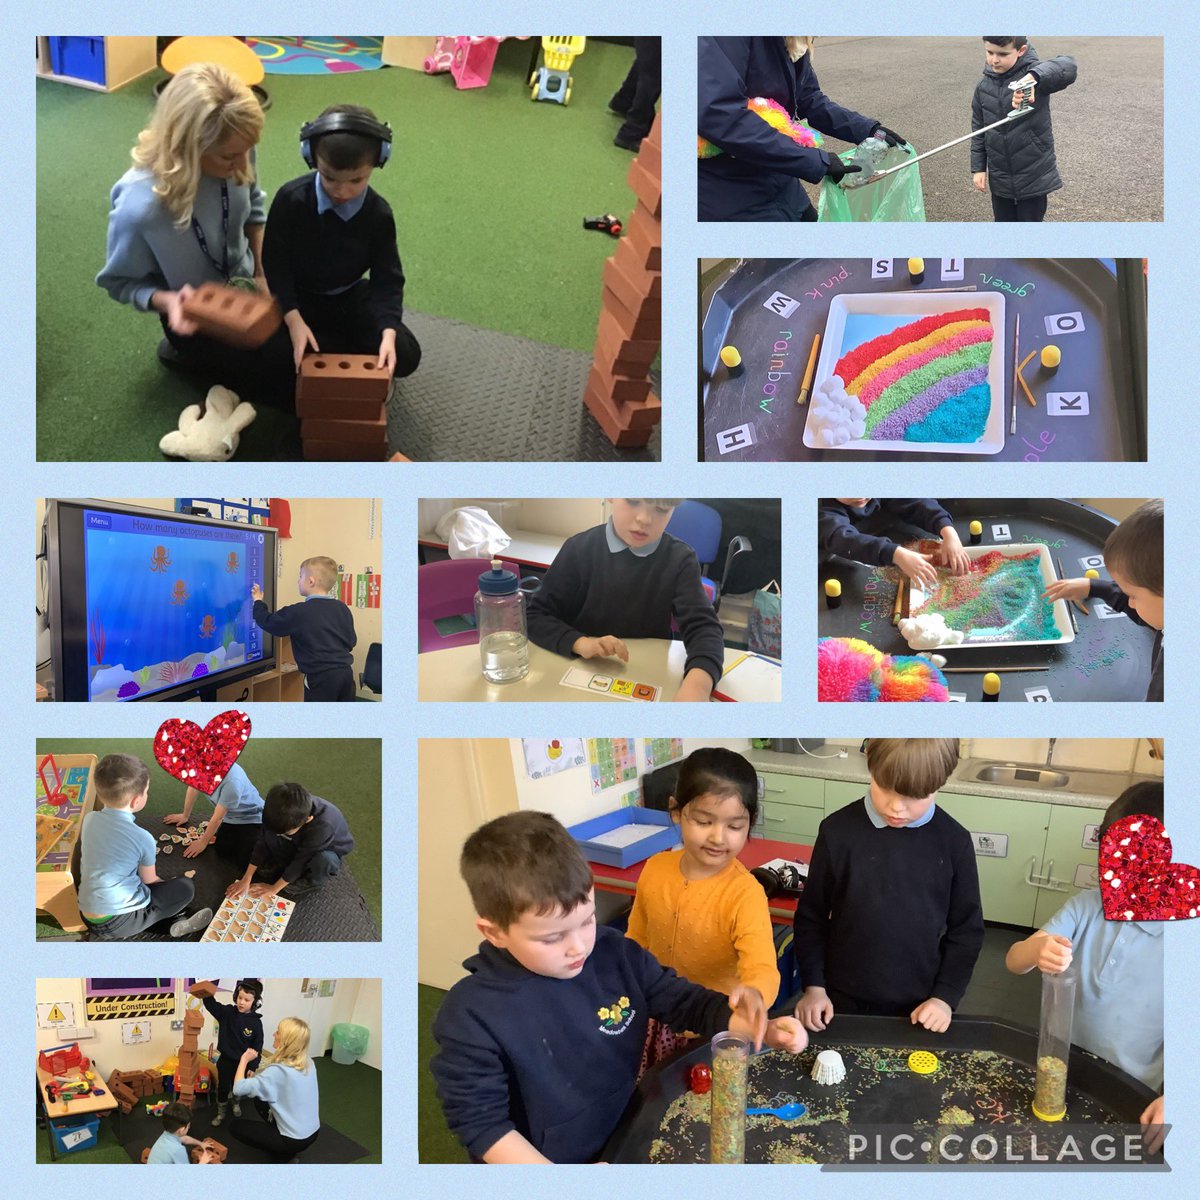 Another busy week in #MbFoxgloveclass and what amazing sharing and collaborative play we have seen. #ambitiousandcapablelearners #friends